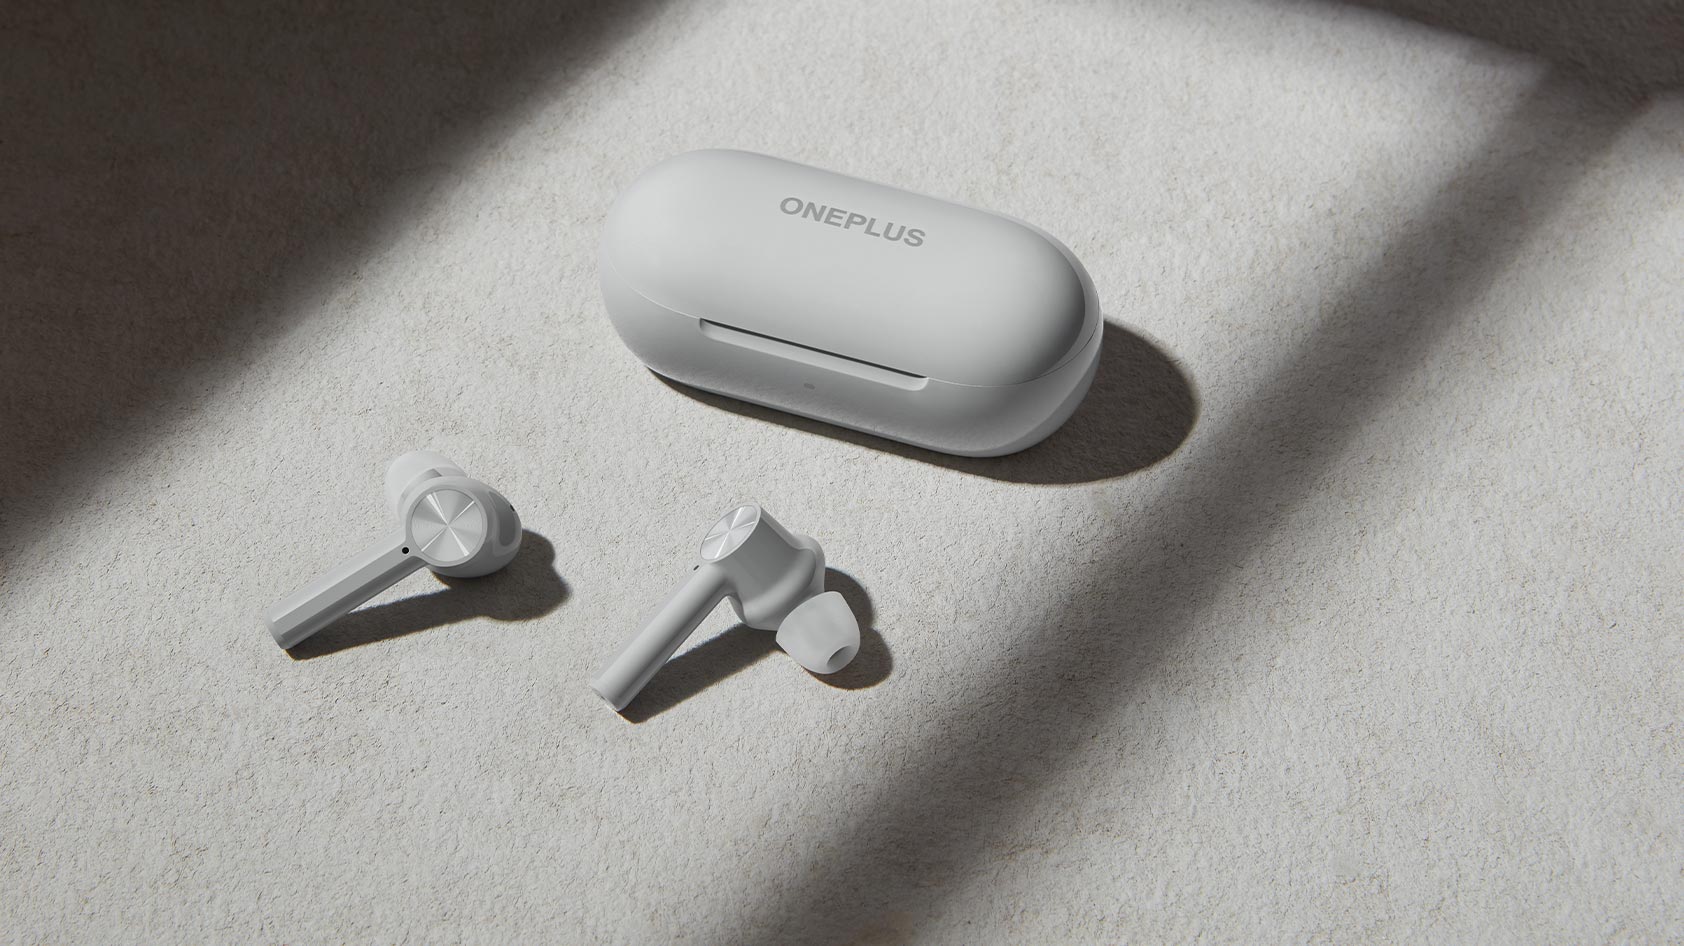 A photo of the OnePlus Buds Z lifestyle true wireless earbuds in off-white against a matching off-white background.